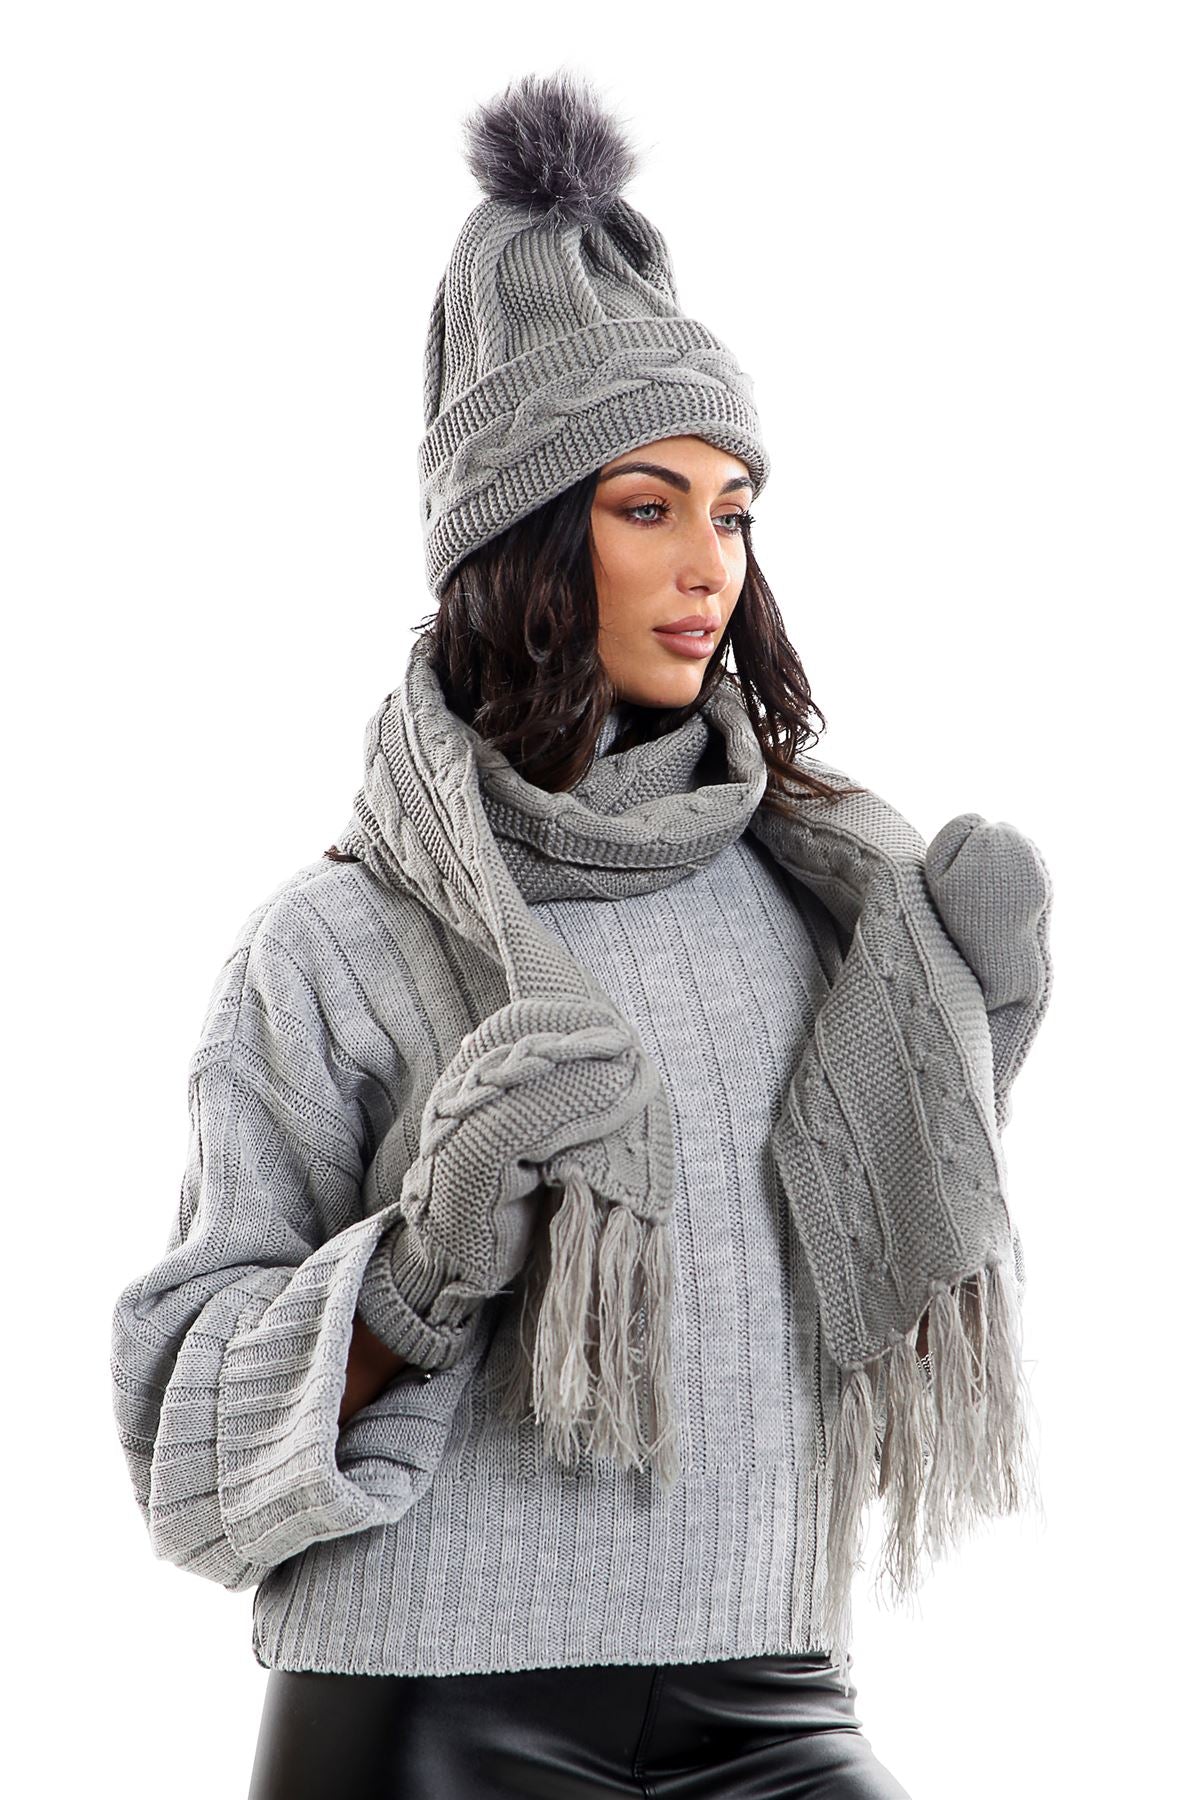 Ladies LHTSF171 Wooly Thick Knitted Hat Scarf & Mitten Set - GREY